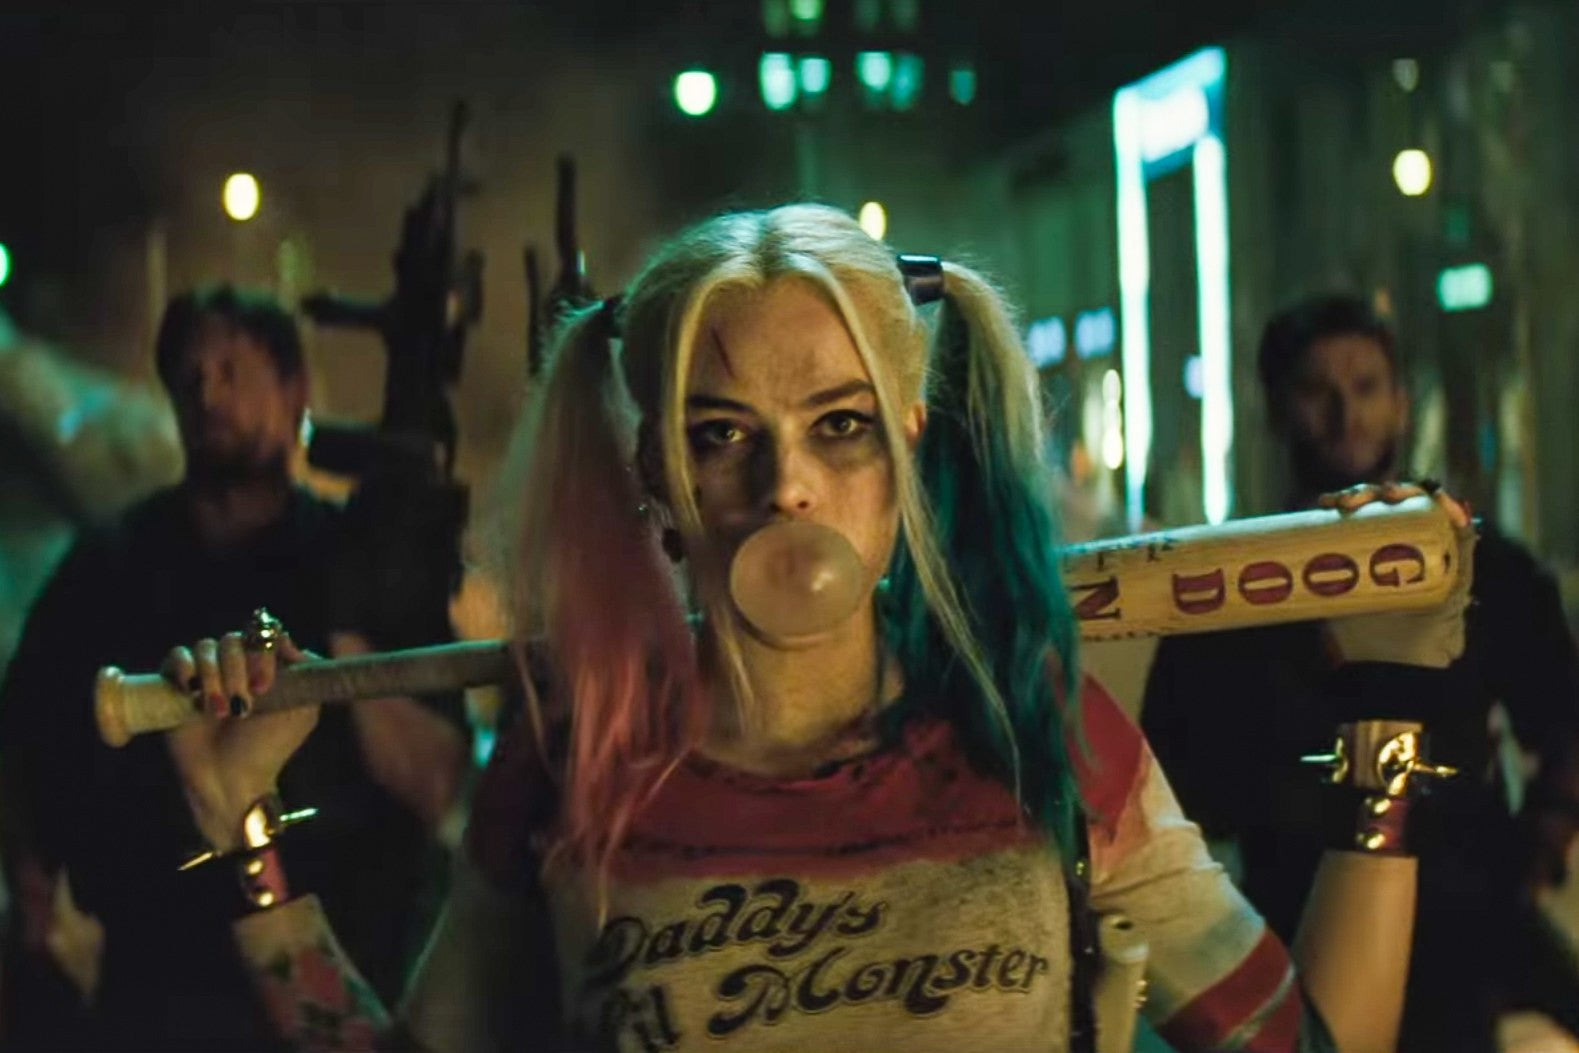 The New Suicide Squad Trailer Is Out! .... Getting More Excited Over Here @PrimalAttitude